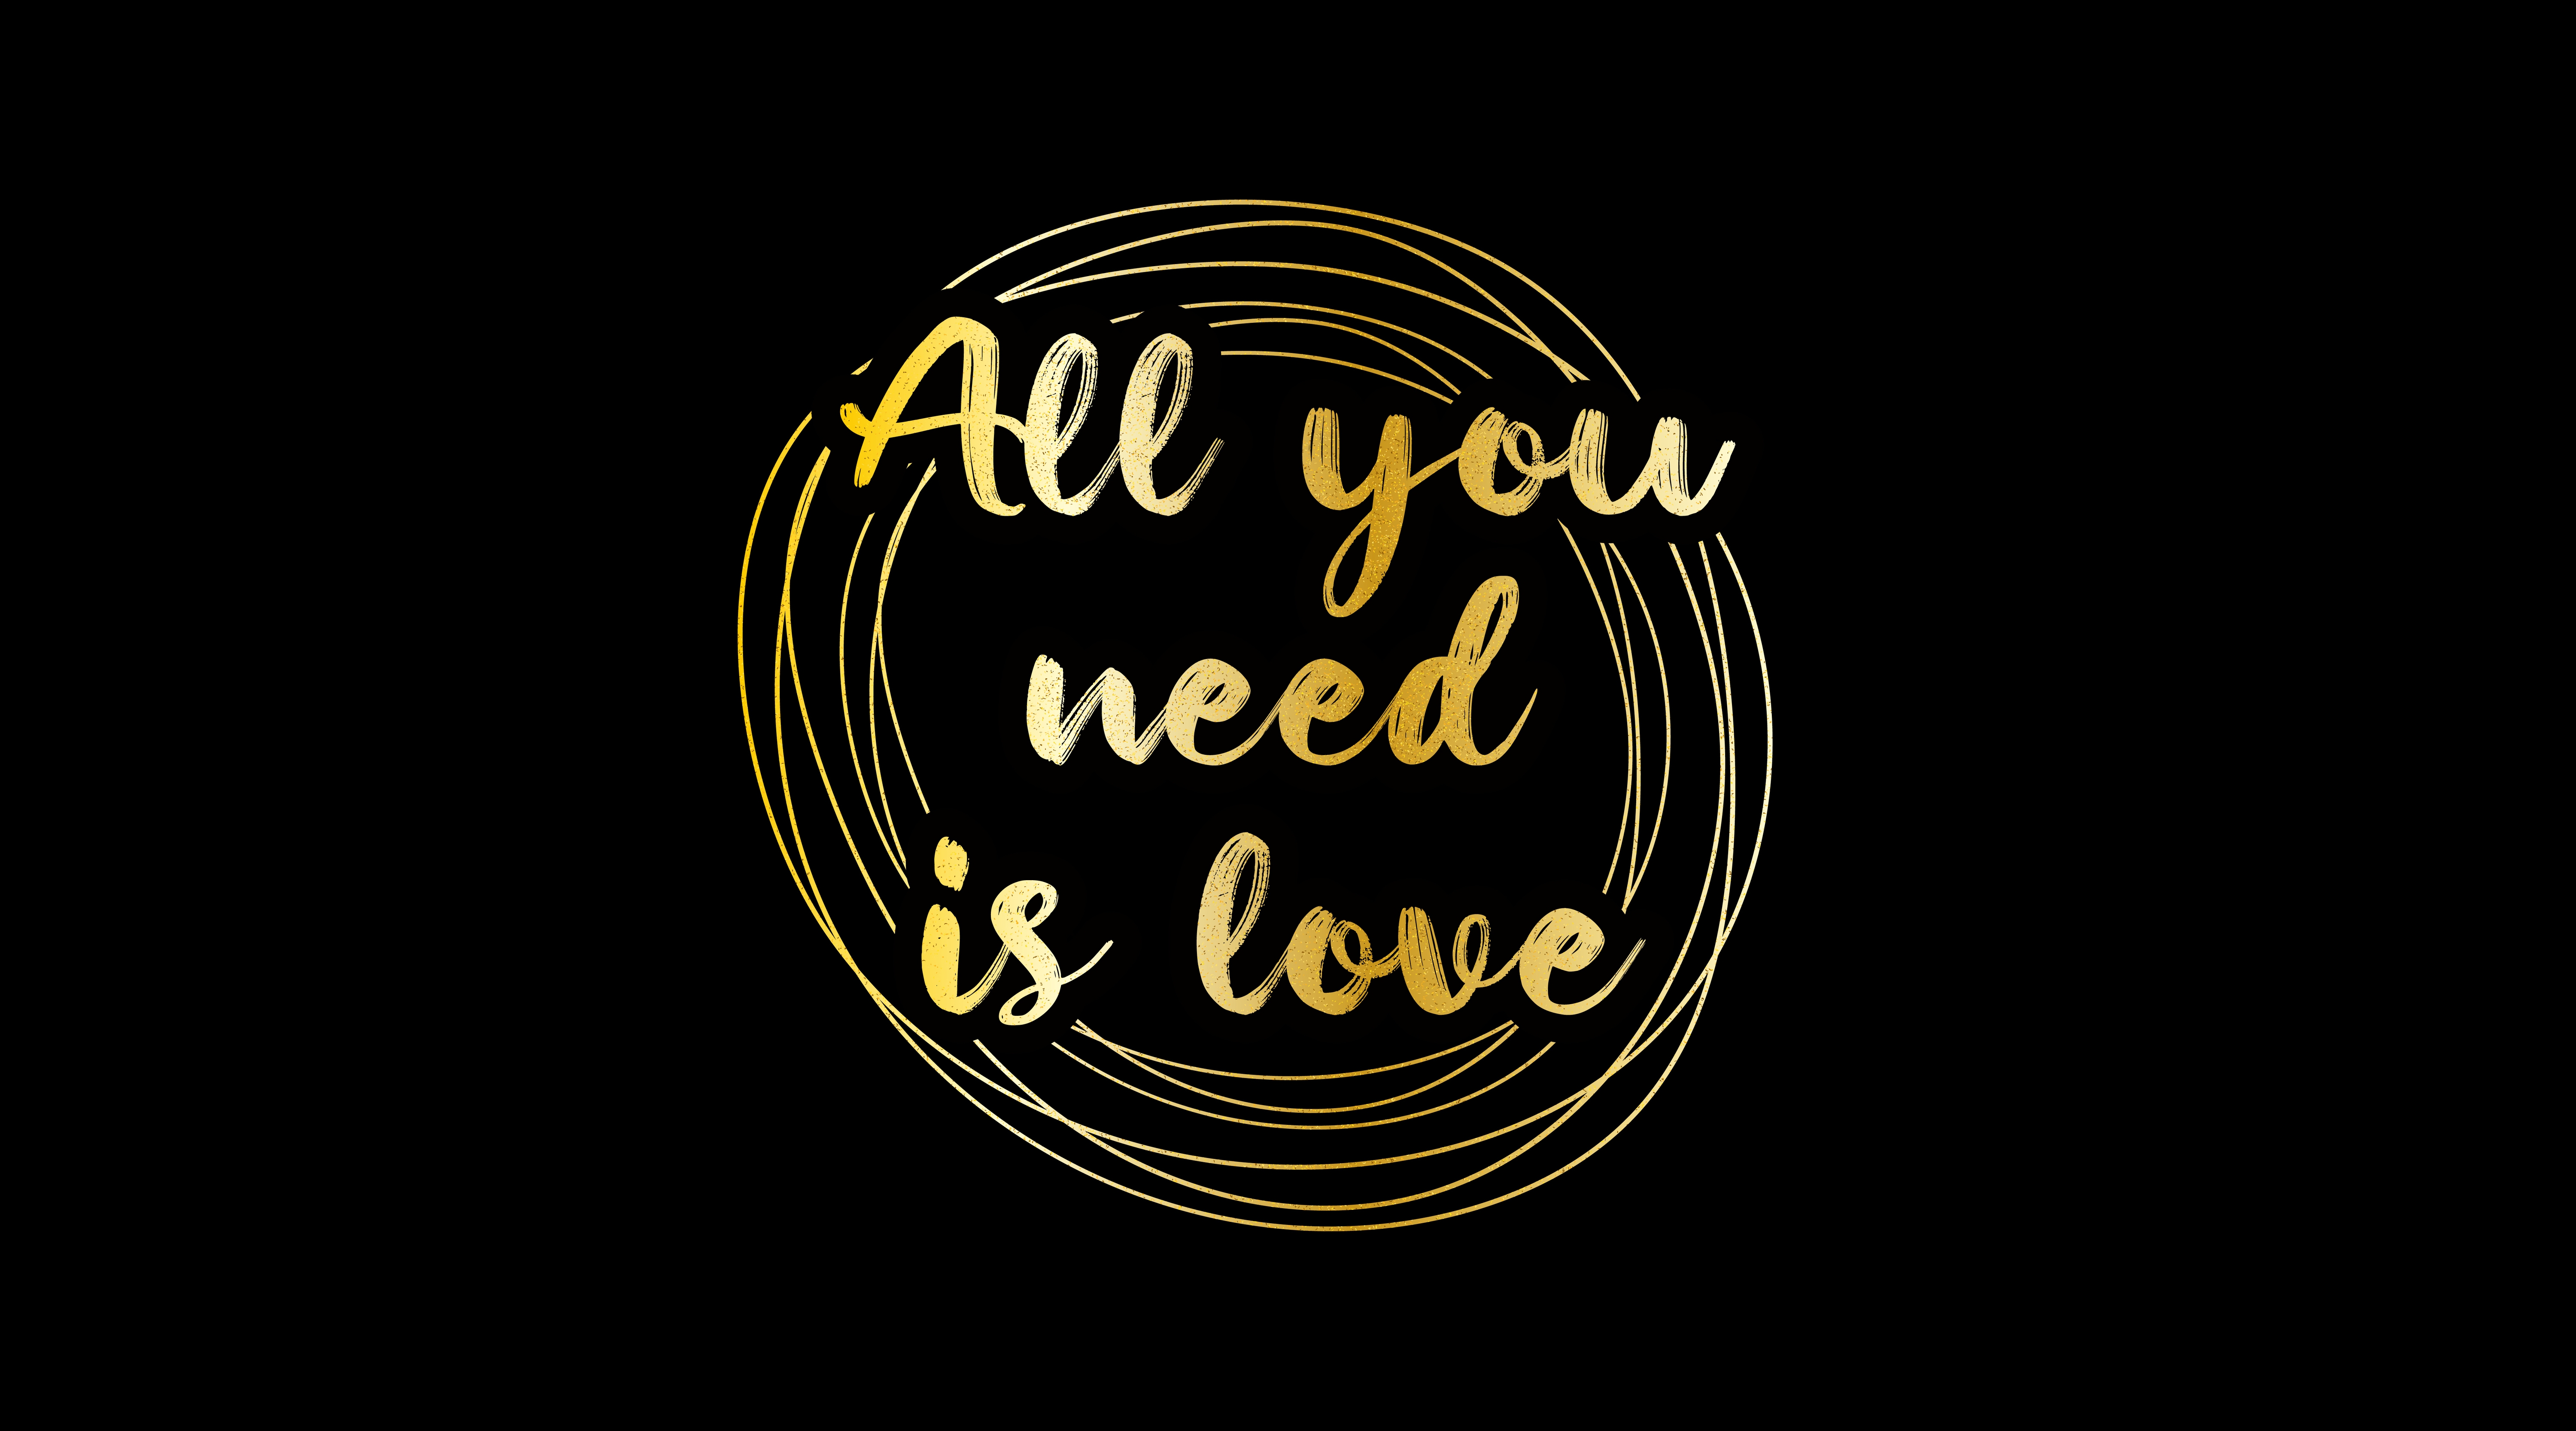 HD wallpaper, Black Background, The Beatles, Amoled, 5K, All You Need Is Love